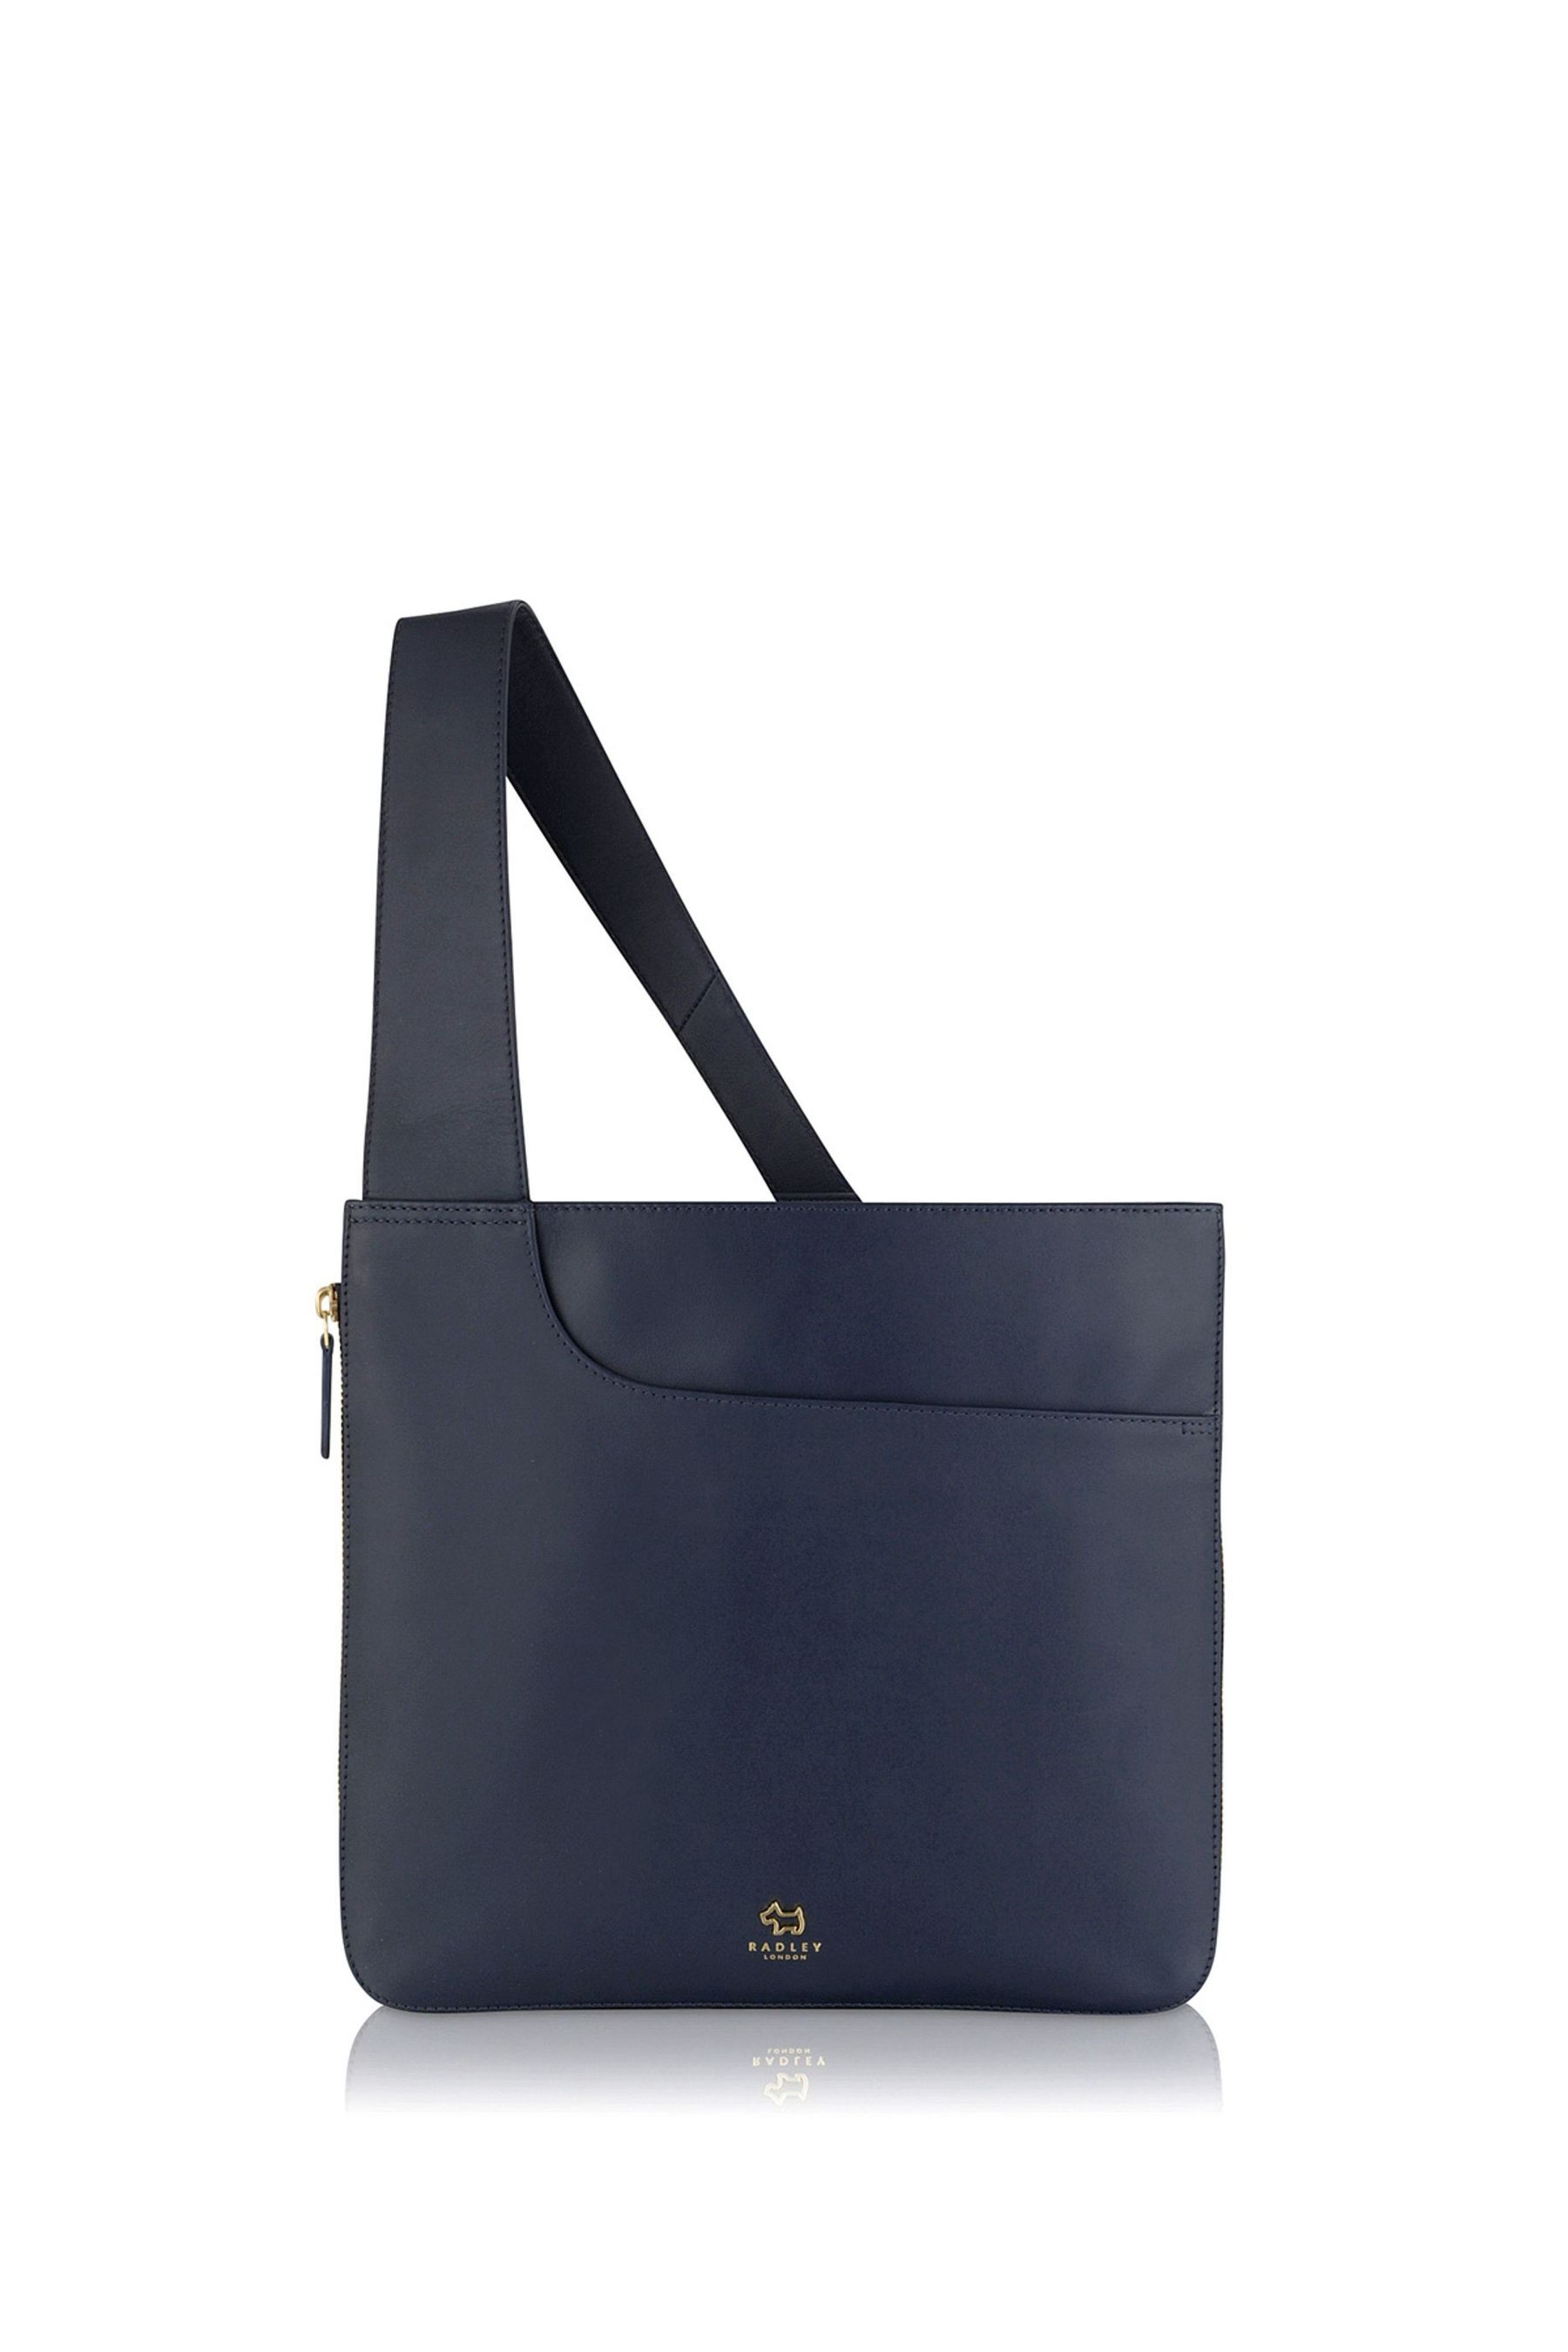 Buy Radley London Large Pockets Zip Around Cross-Body Bag from the Next ...